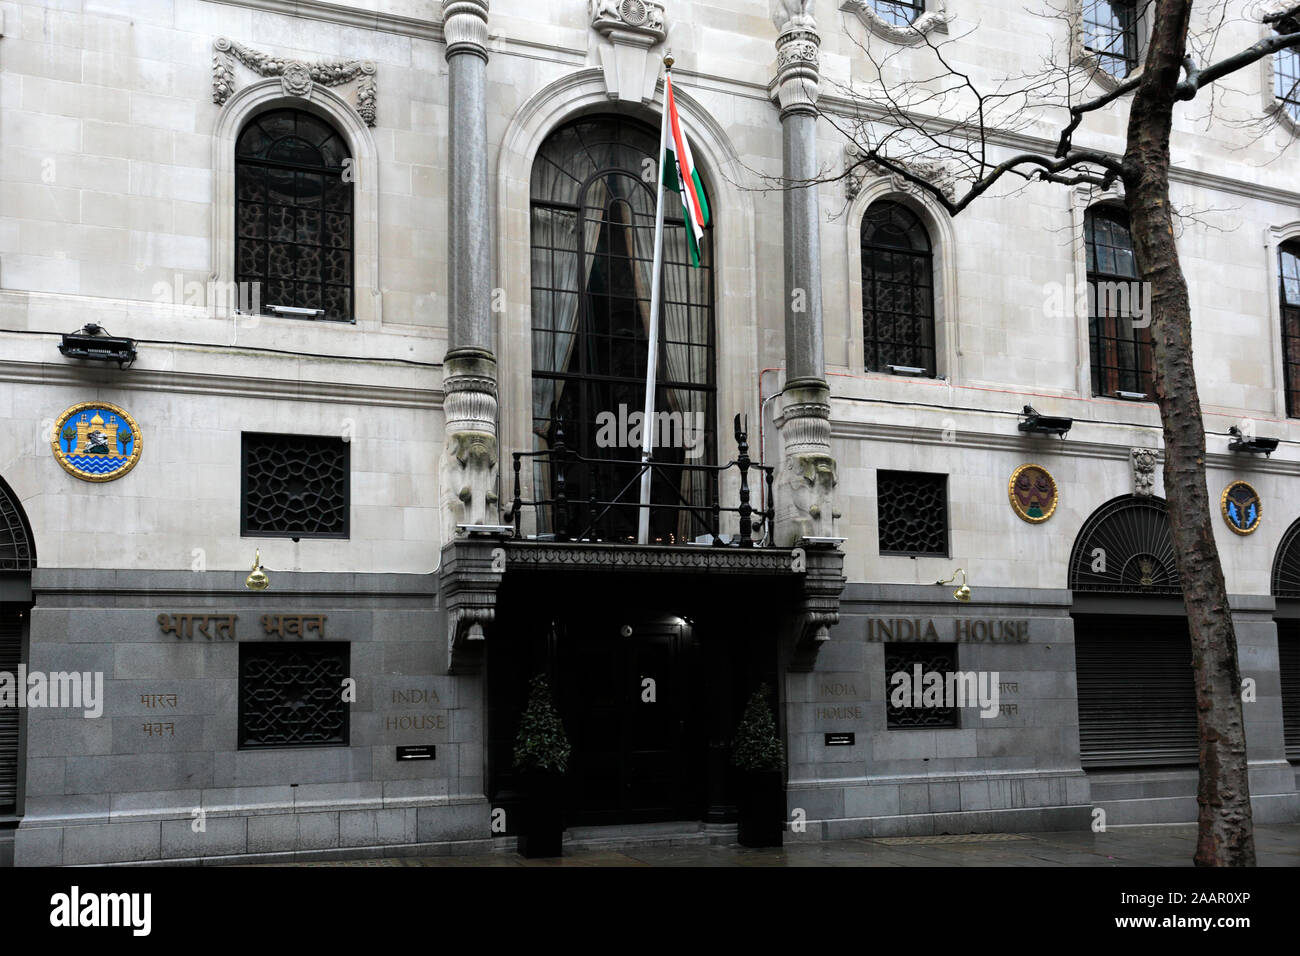 Exterior of India House, Aldwych, London, England Stock Photo